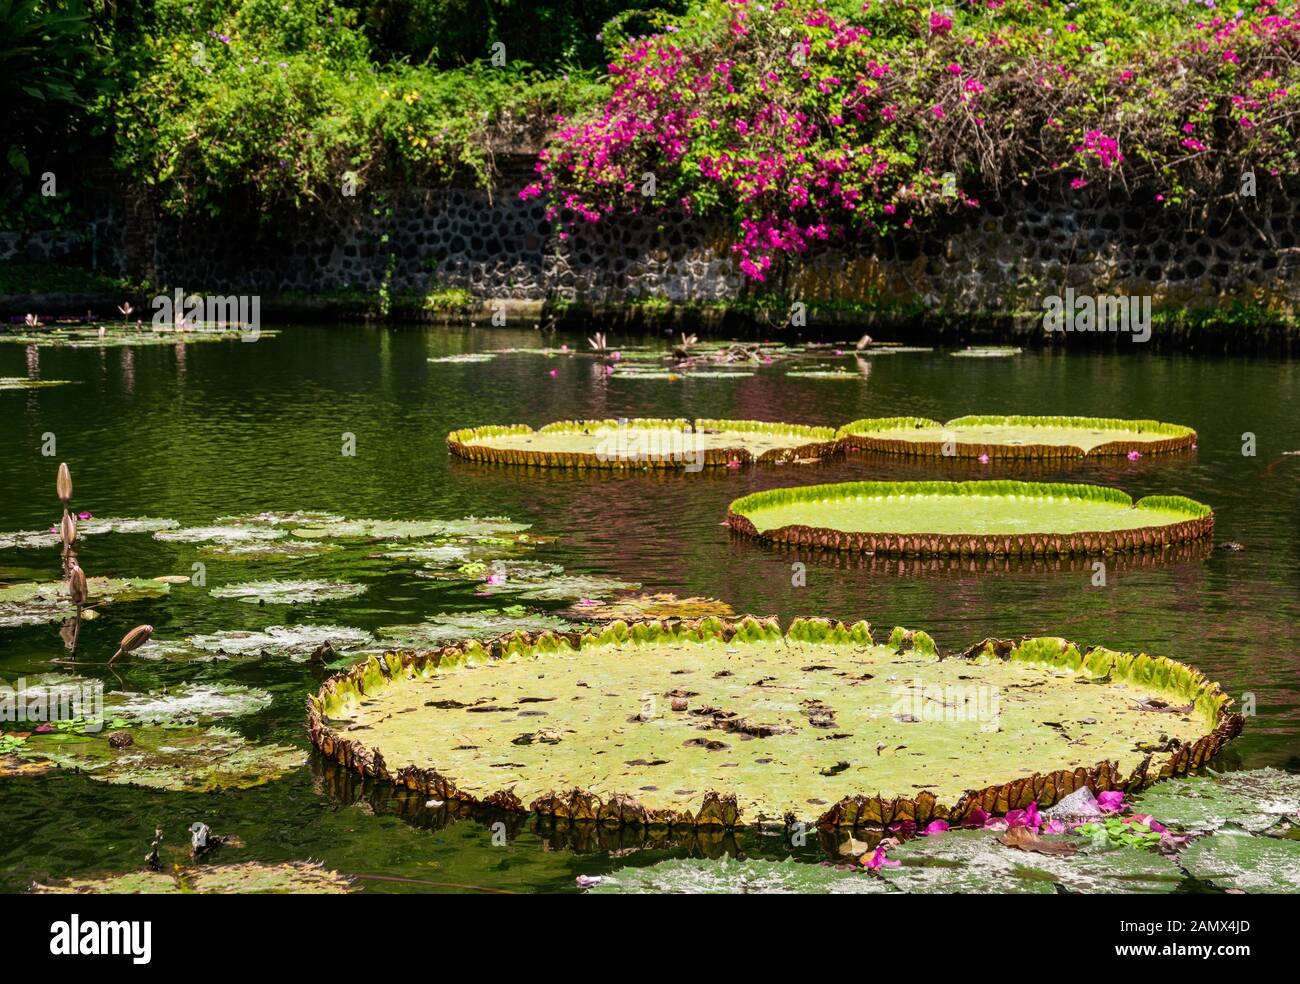 Giant lily pads floating on the water Stock Photo